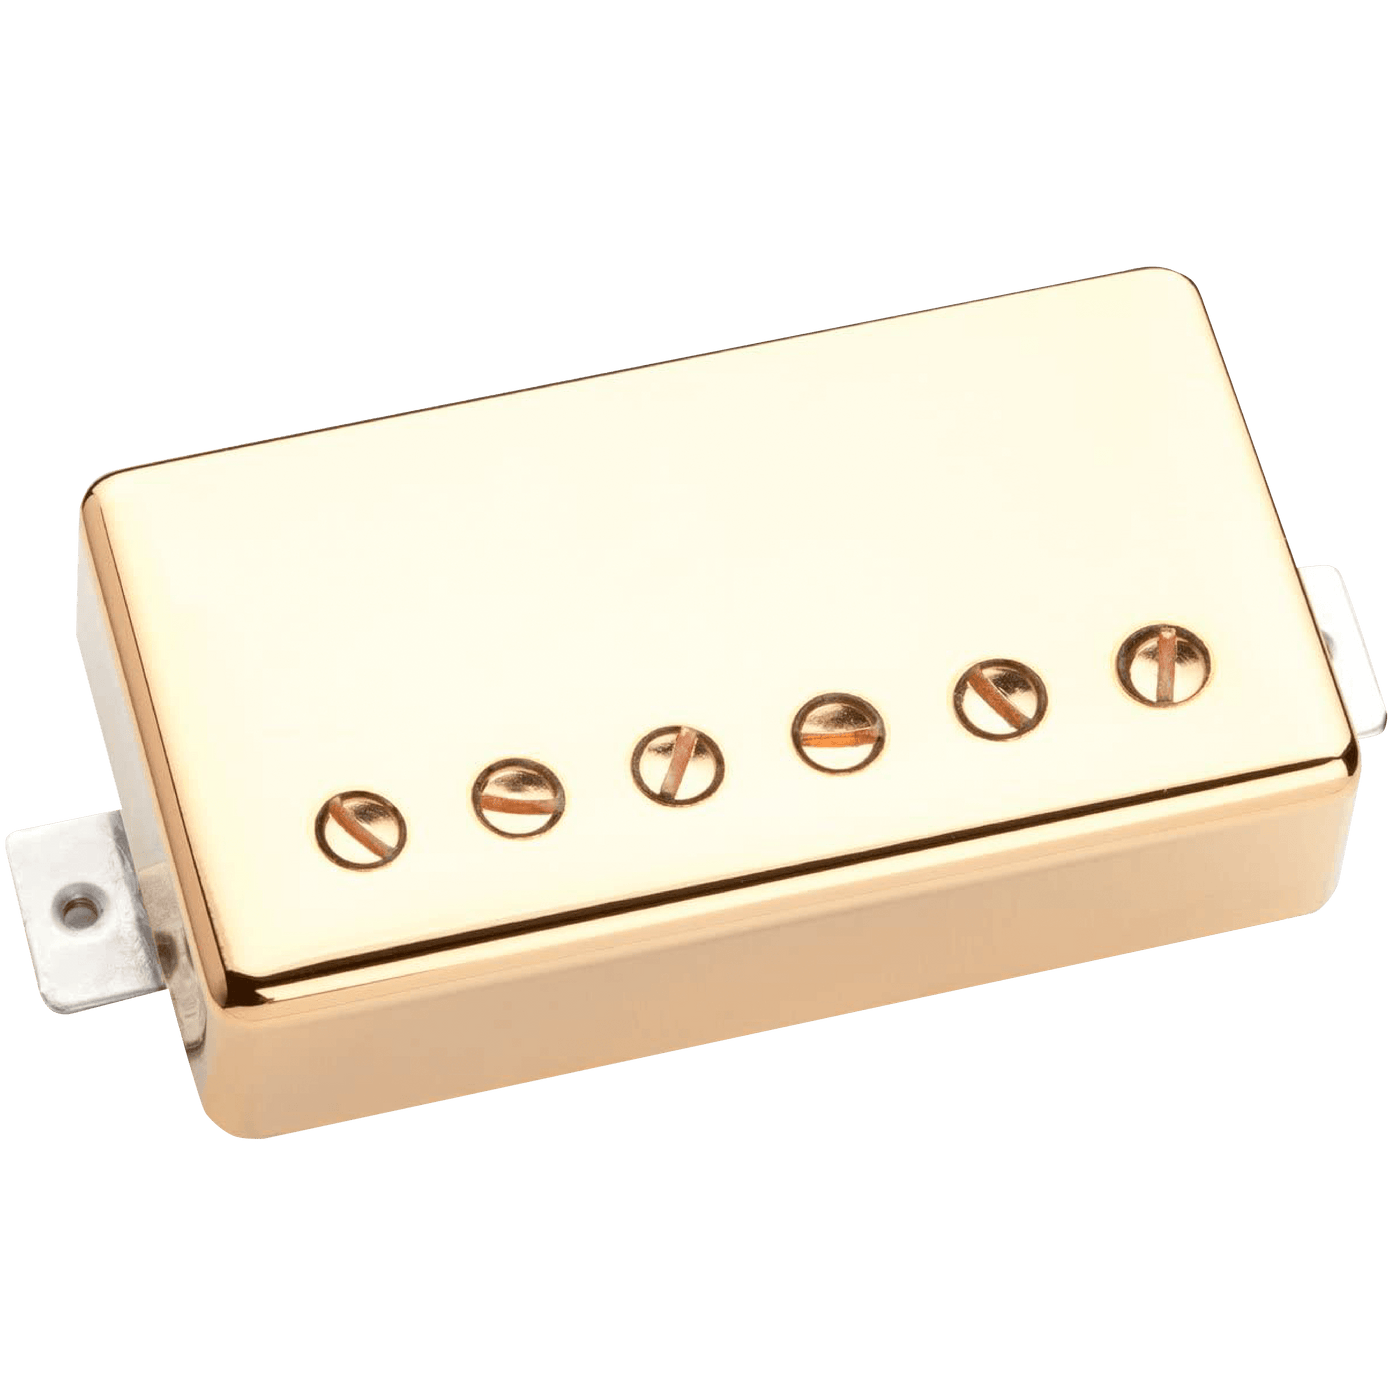 Suhr Asatobucker Humbucker Gold Cover (Bridge) - $189990 - Gearhub - Mateus Asato has established himself as one of the most melodic and inspirational guitar players in the world today. His collaboration with John Suhr has resulted in the all-new Asatobucker®, a vintage-inspired bridge humbucker with superb warmth and touch sensitivity. Alnico IV magnets are used to create the soft and sweet attack that is the quintessential Mateus sound. Spacing • 53mm DC Resistance • 9.2K Ω Hook Up Wire • 4-Conductor Wire